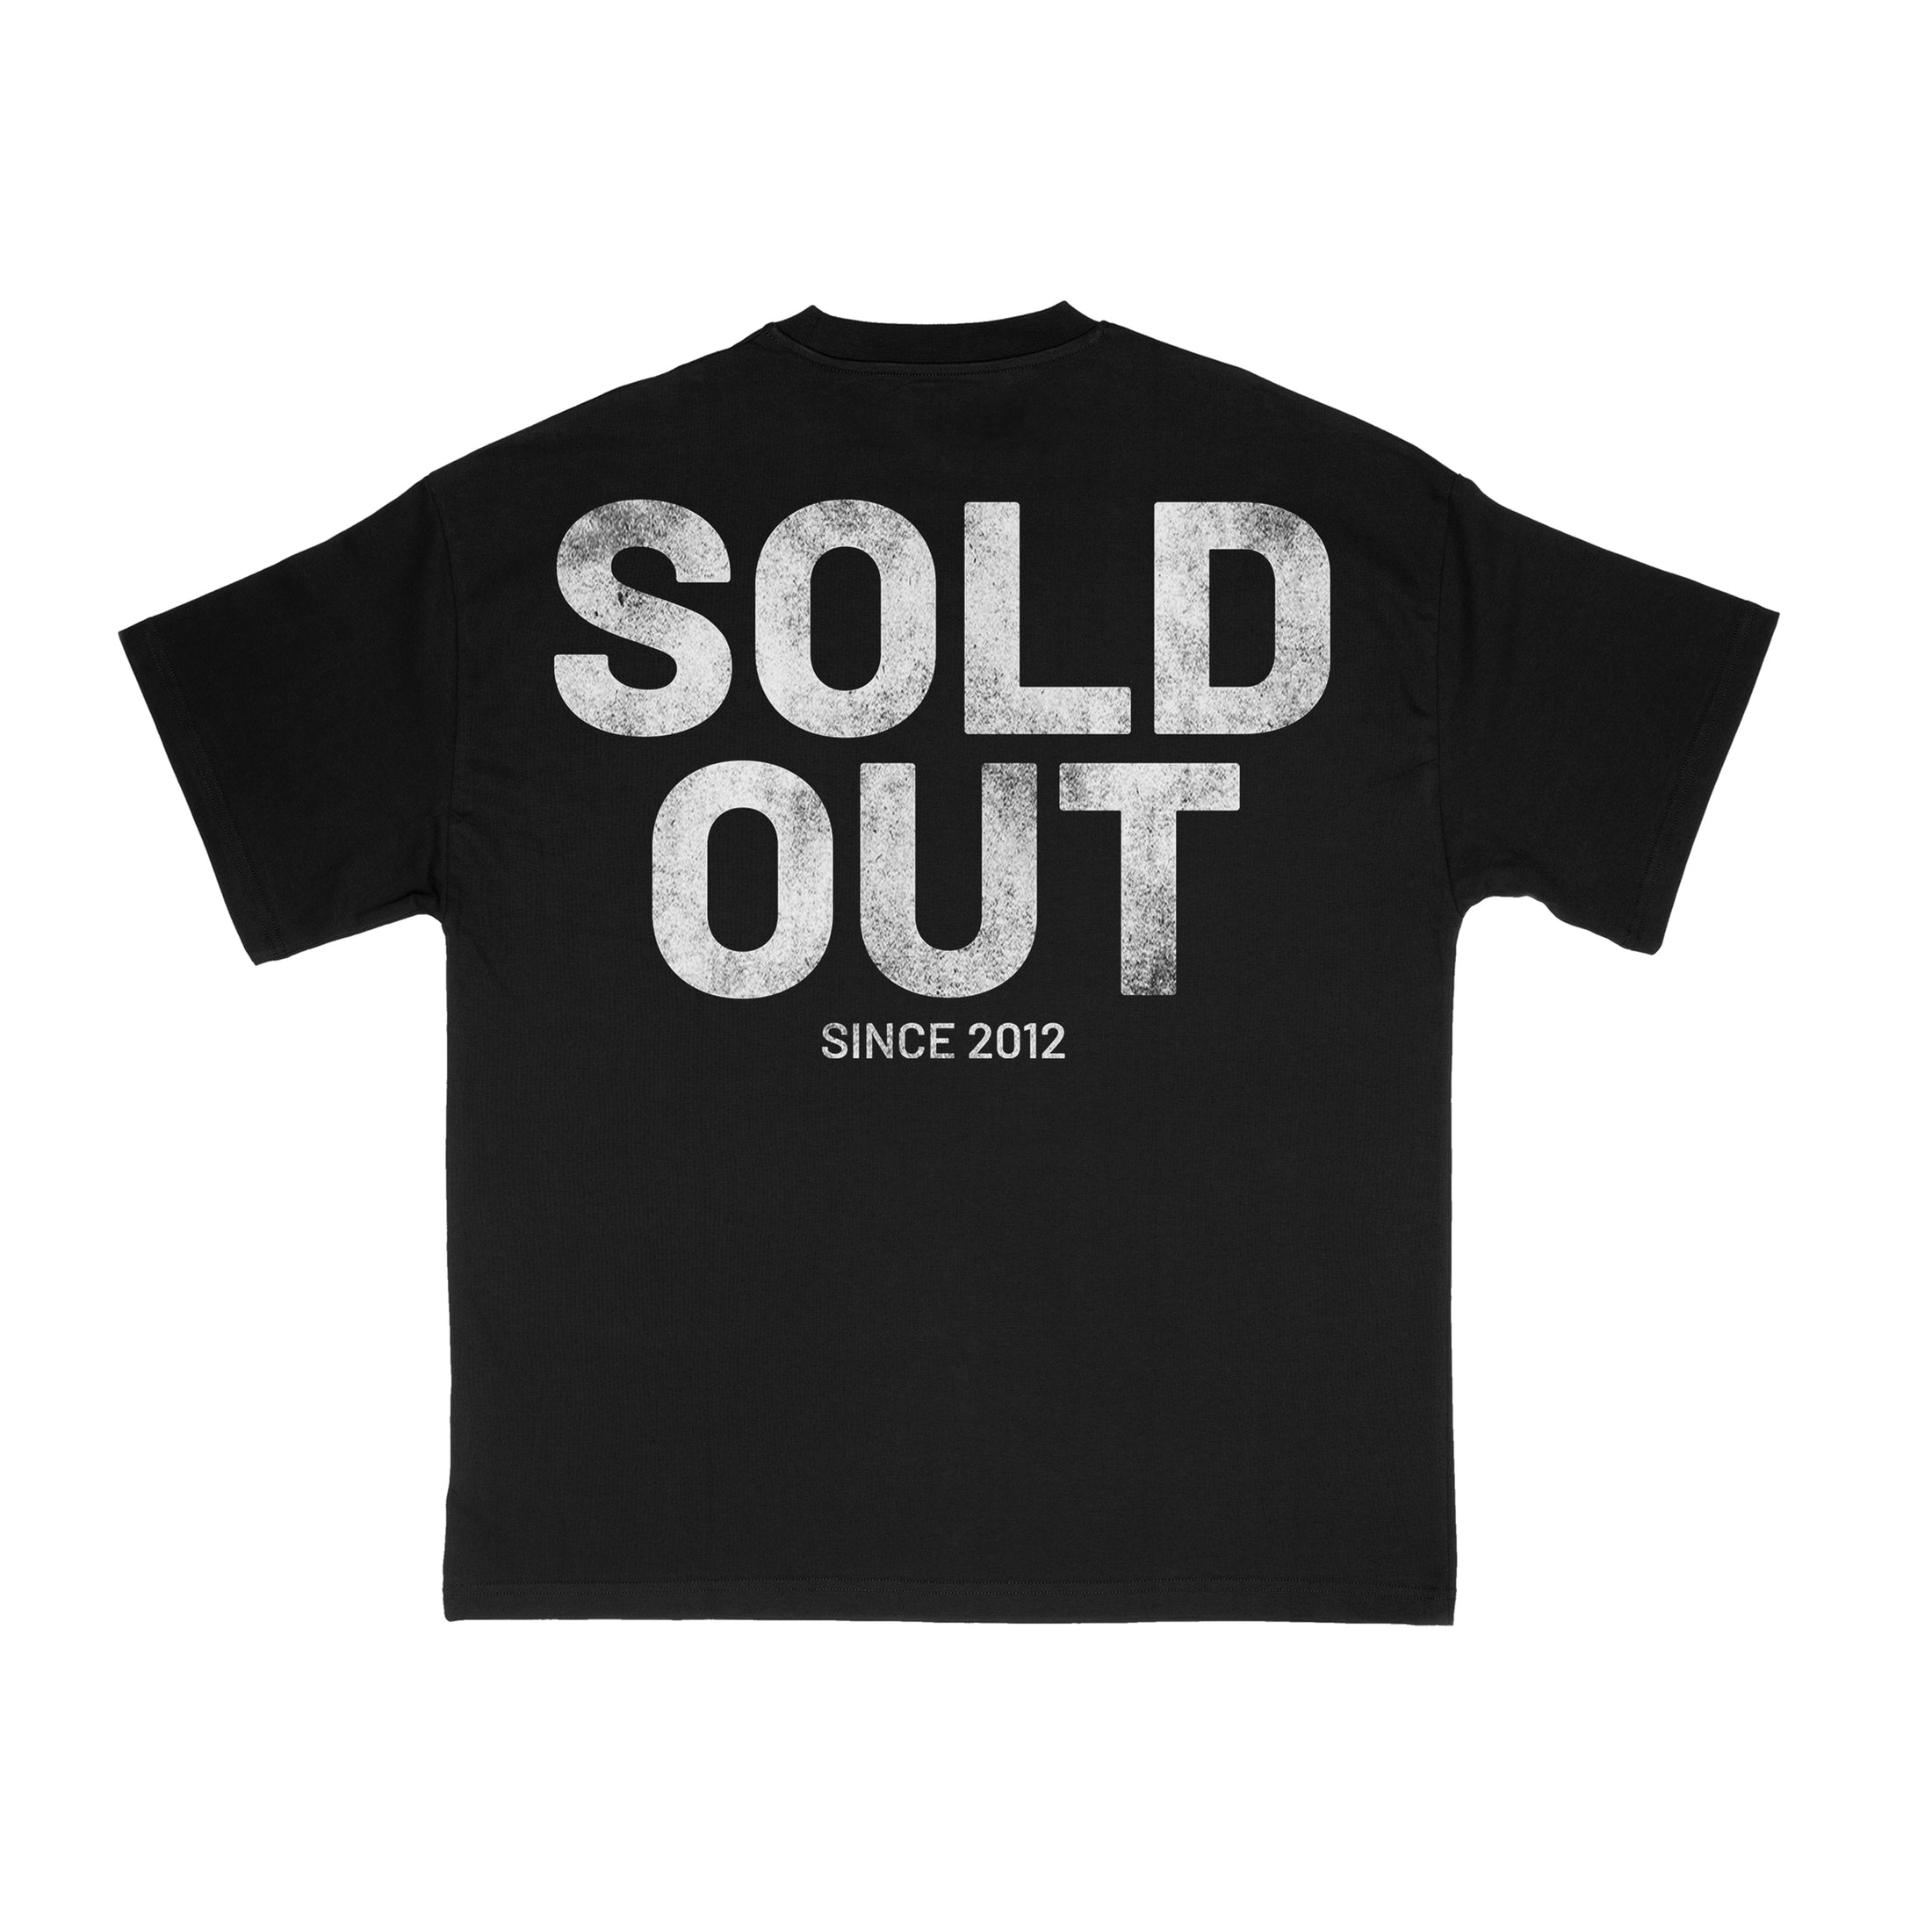 SOLD OUT (Black/White)